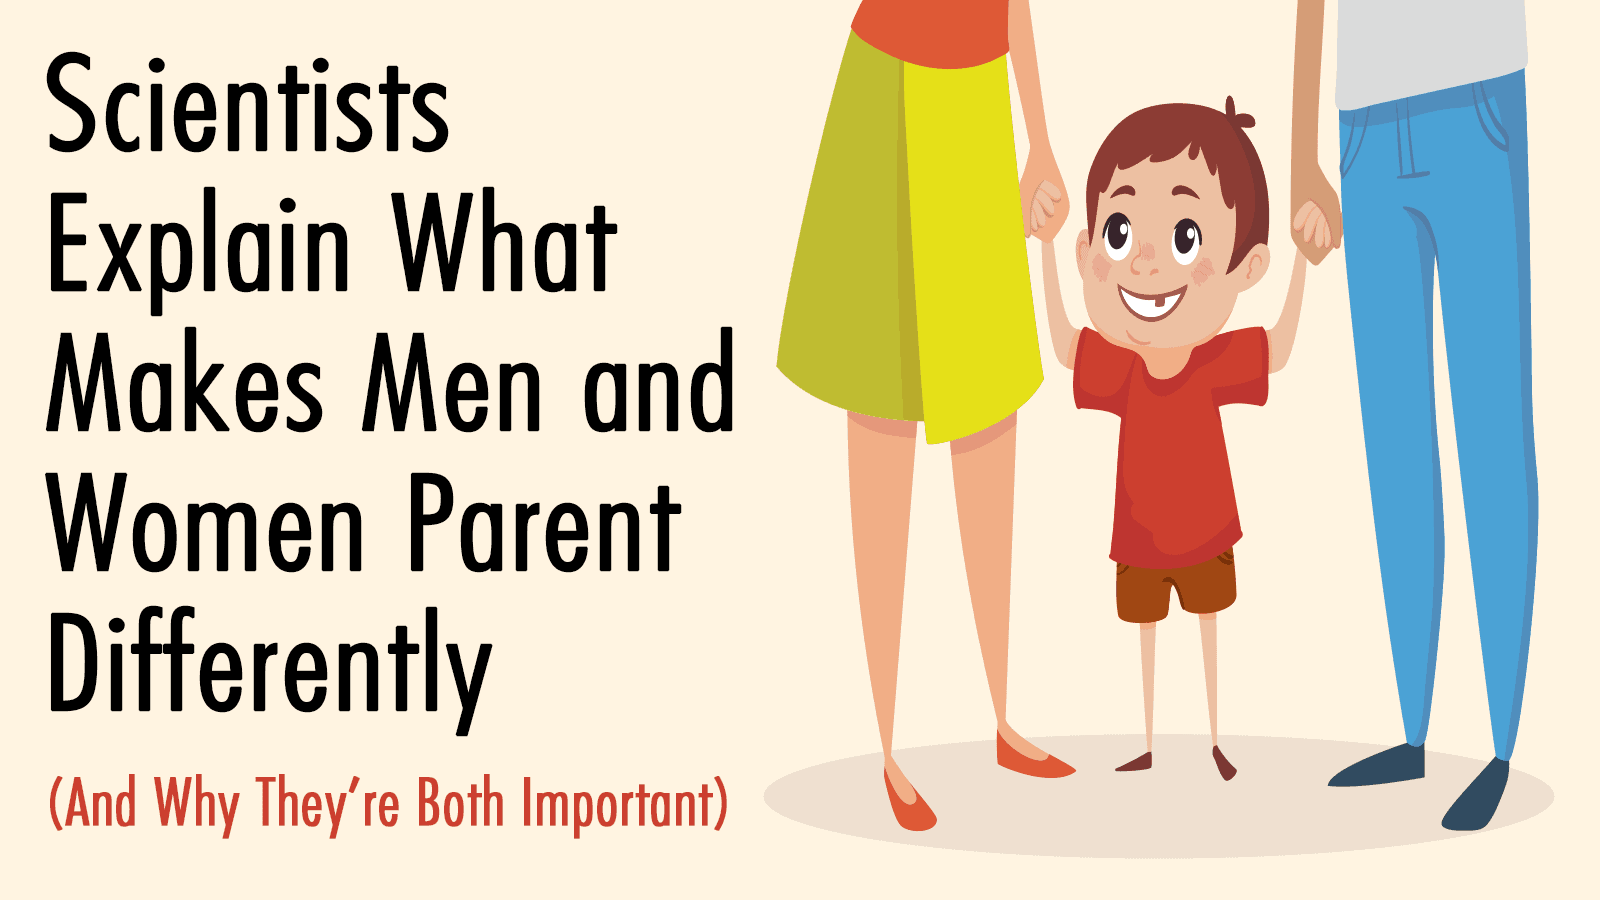 Scientists Explain What Makes Men and Women Parent Differently (And Why They’re Both Important)